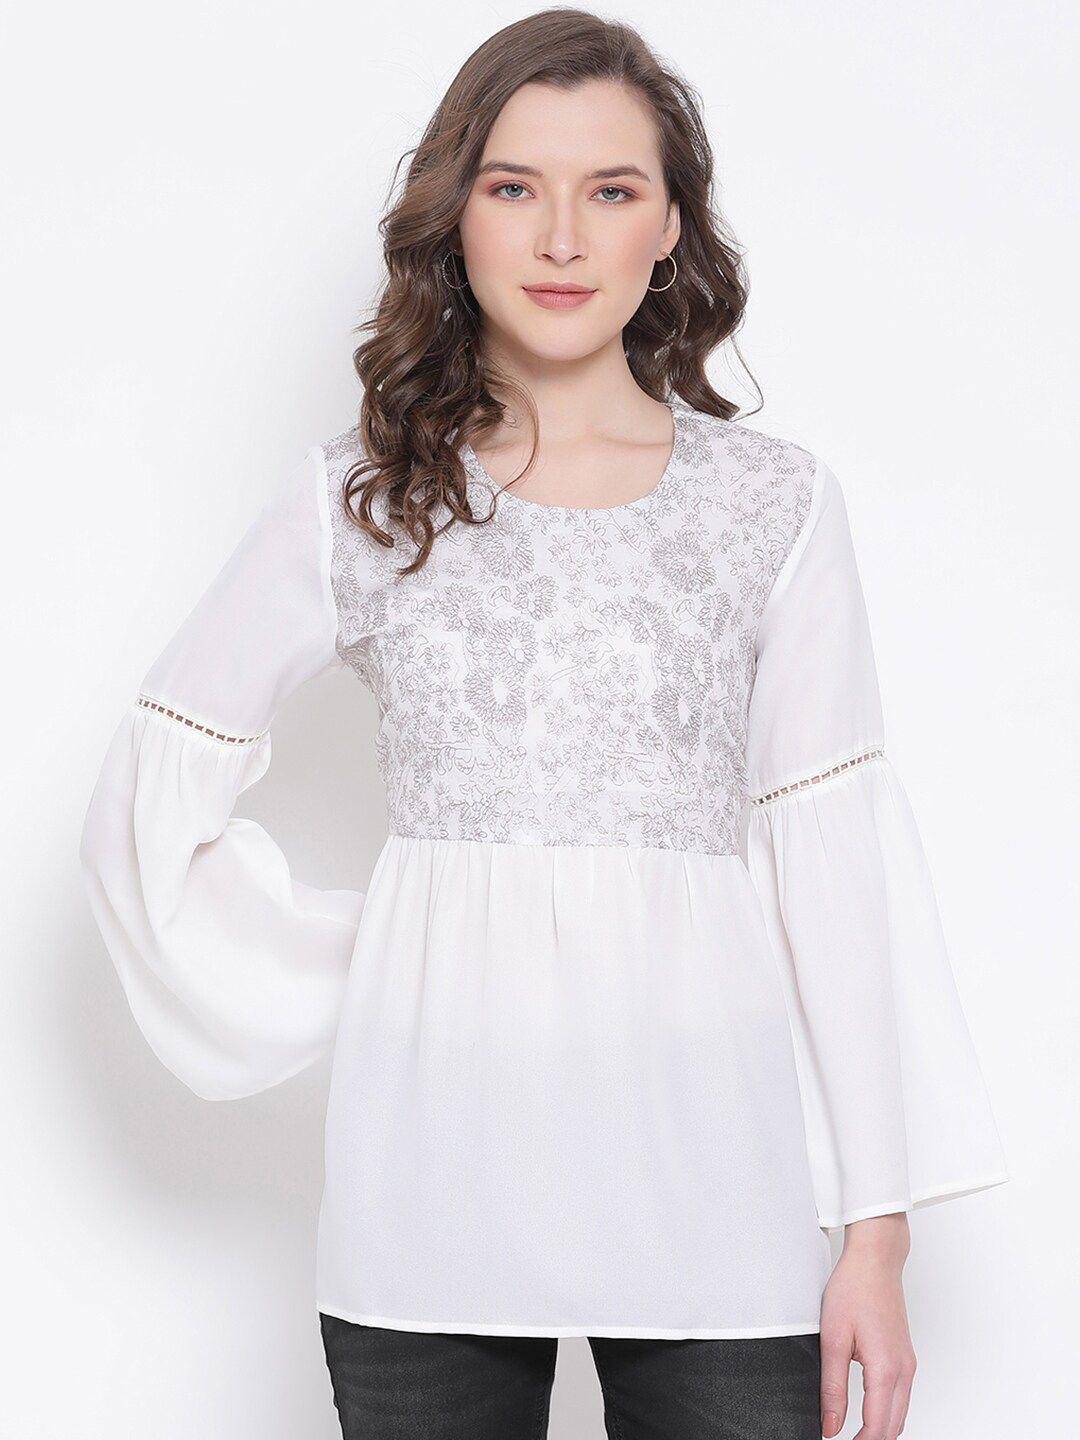 ly2-women-white-and-grey-bell-sleeves-printed-empire-top